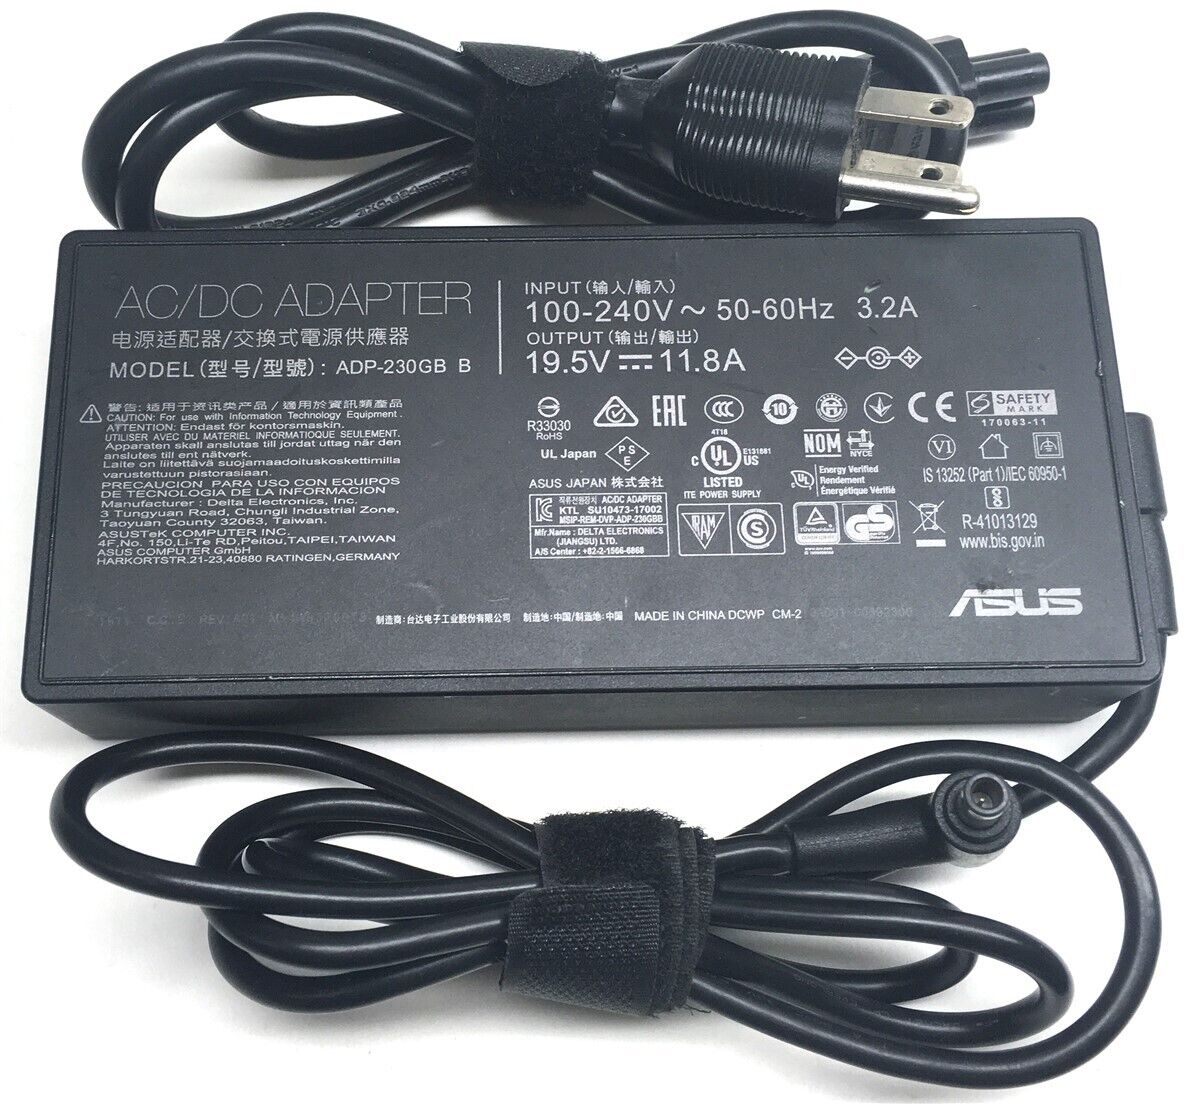 Genuine Asus Laptop Charger AC Adapter Power Supply ADP-230GB B 19.5V 11.8A 230W